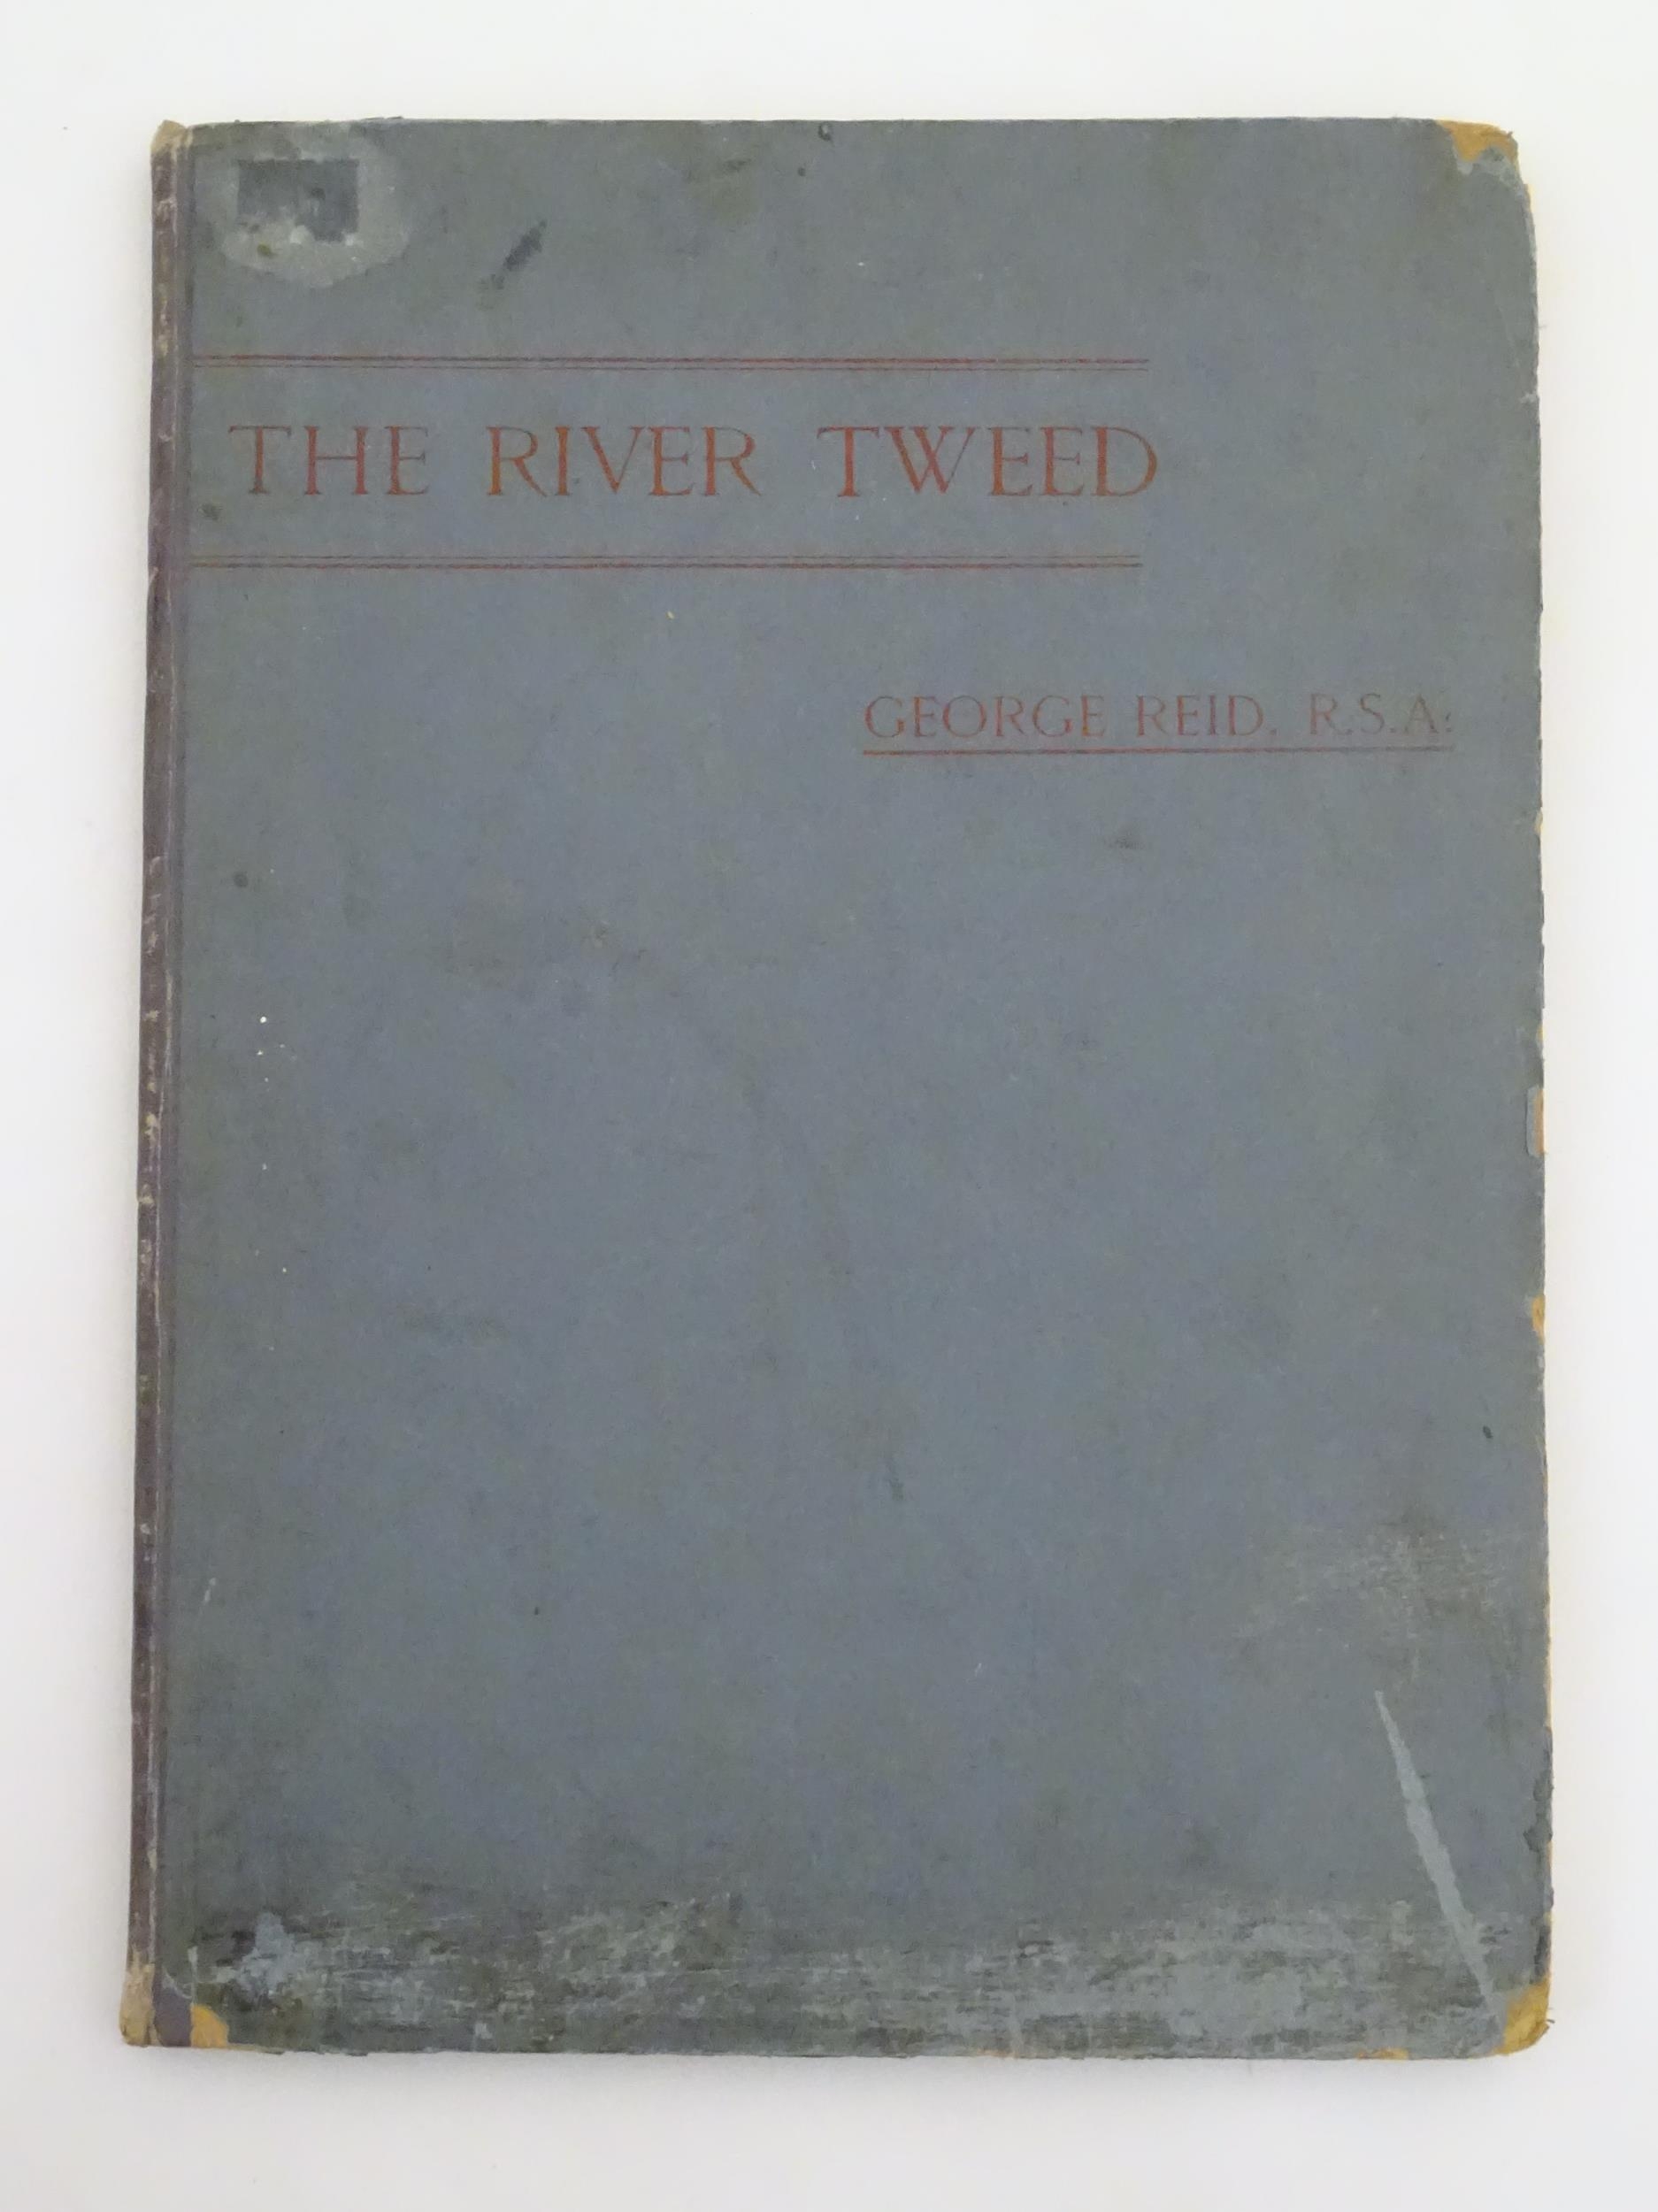 Book: The River Tweed - From its source to the sea, by Professor Veitch, with illustrations by - Image 7 of 11